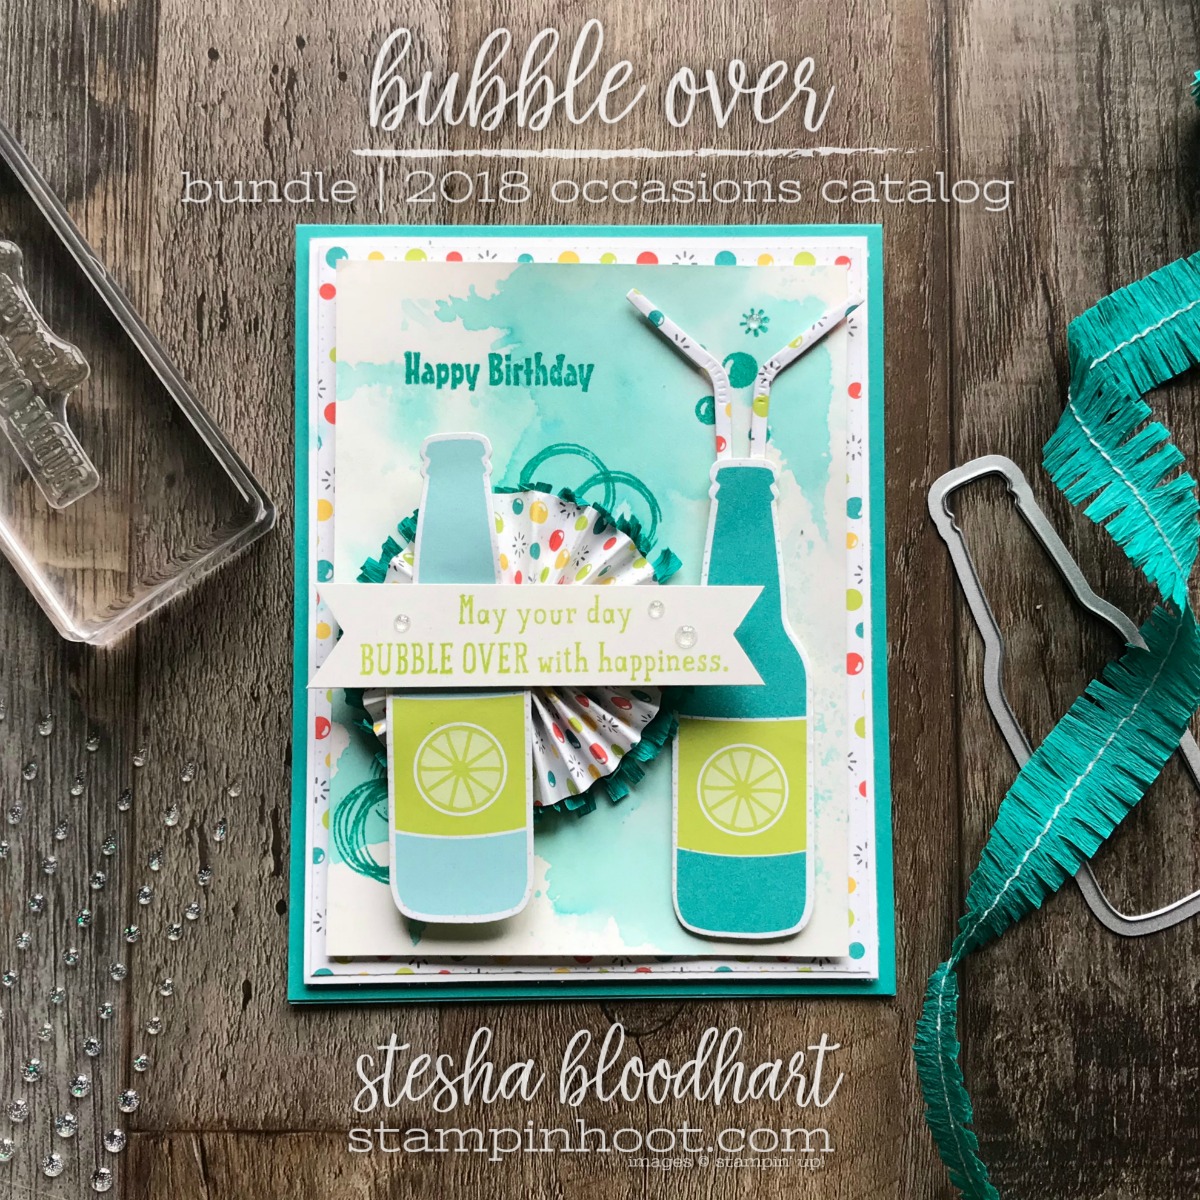 Bubble Over Bundle by Stampin' Up! 2018 Occasions Catalog, Bubbles & Fizz DSP by Stampin' Up! 2018 Sale-a-Bration Catalog Card Created by Stesha Bloodhart, Stampin' Hoot! For the December Birthdays Blog Hop #steshabloodhart #stampinhoot